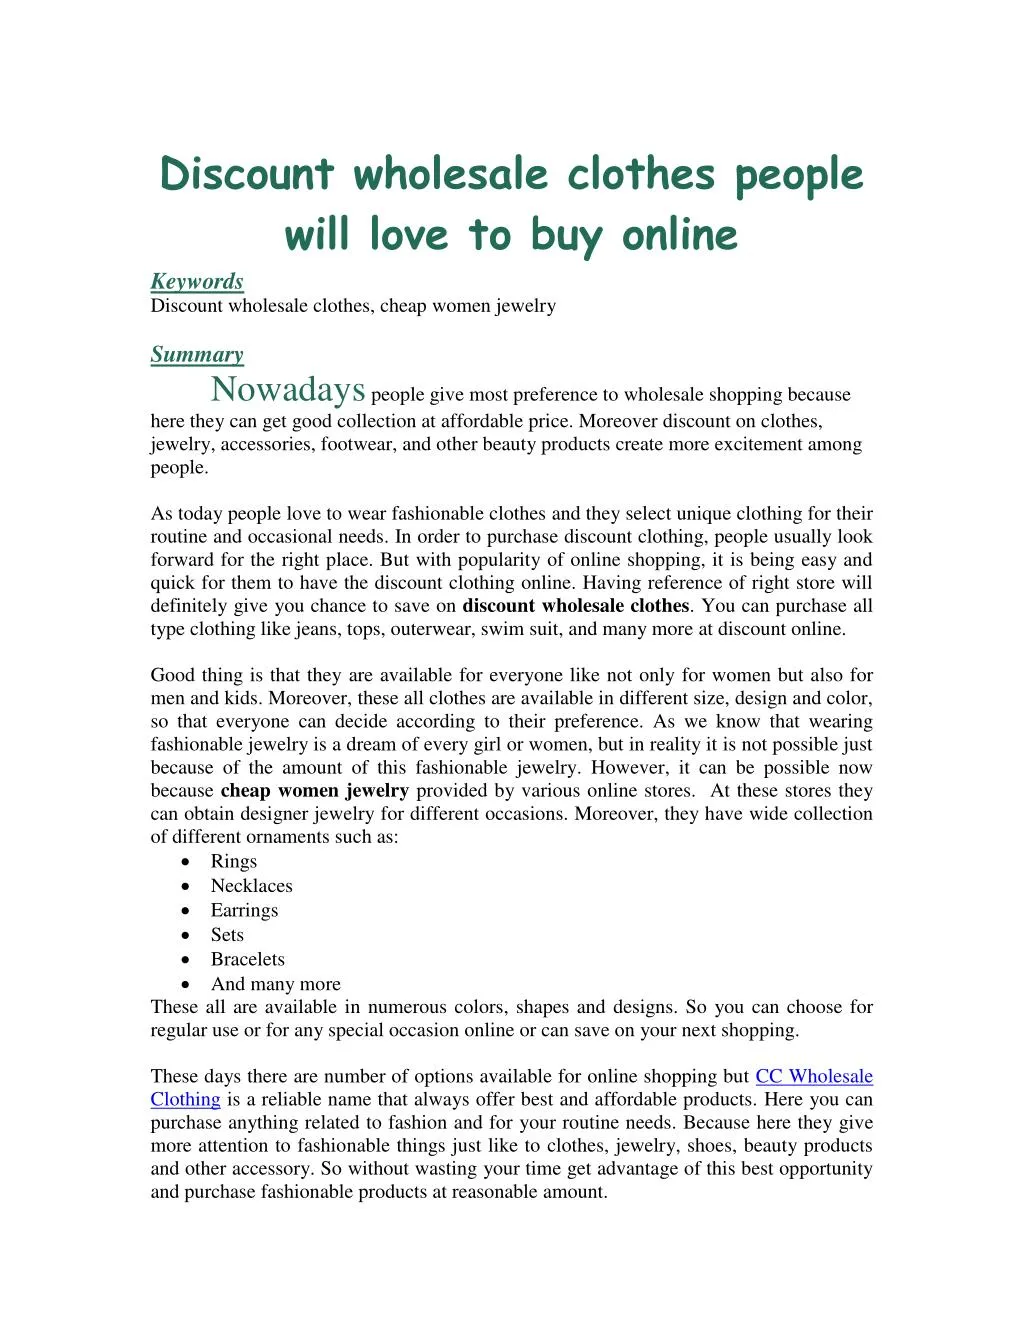 discount wholesale clothes people will love